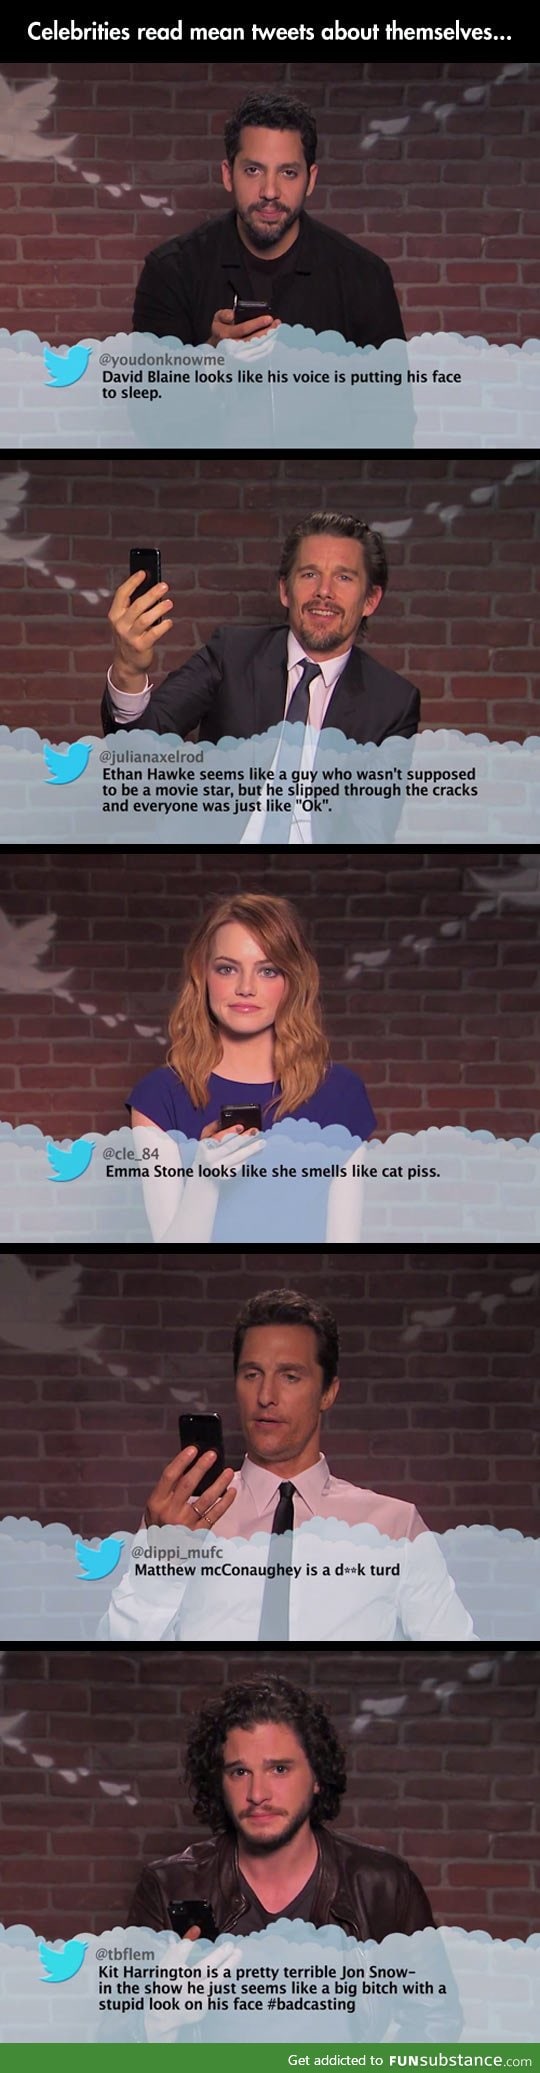 Mean tweets about celebrities